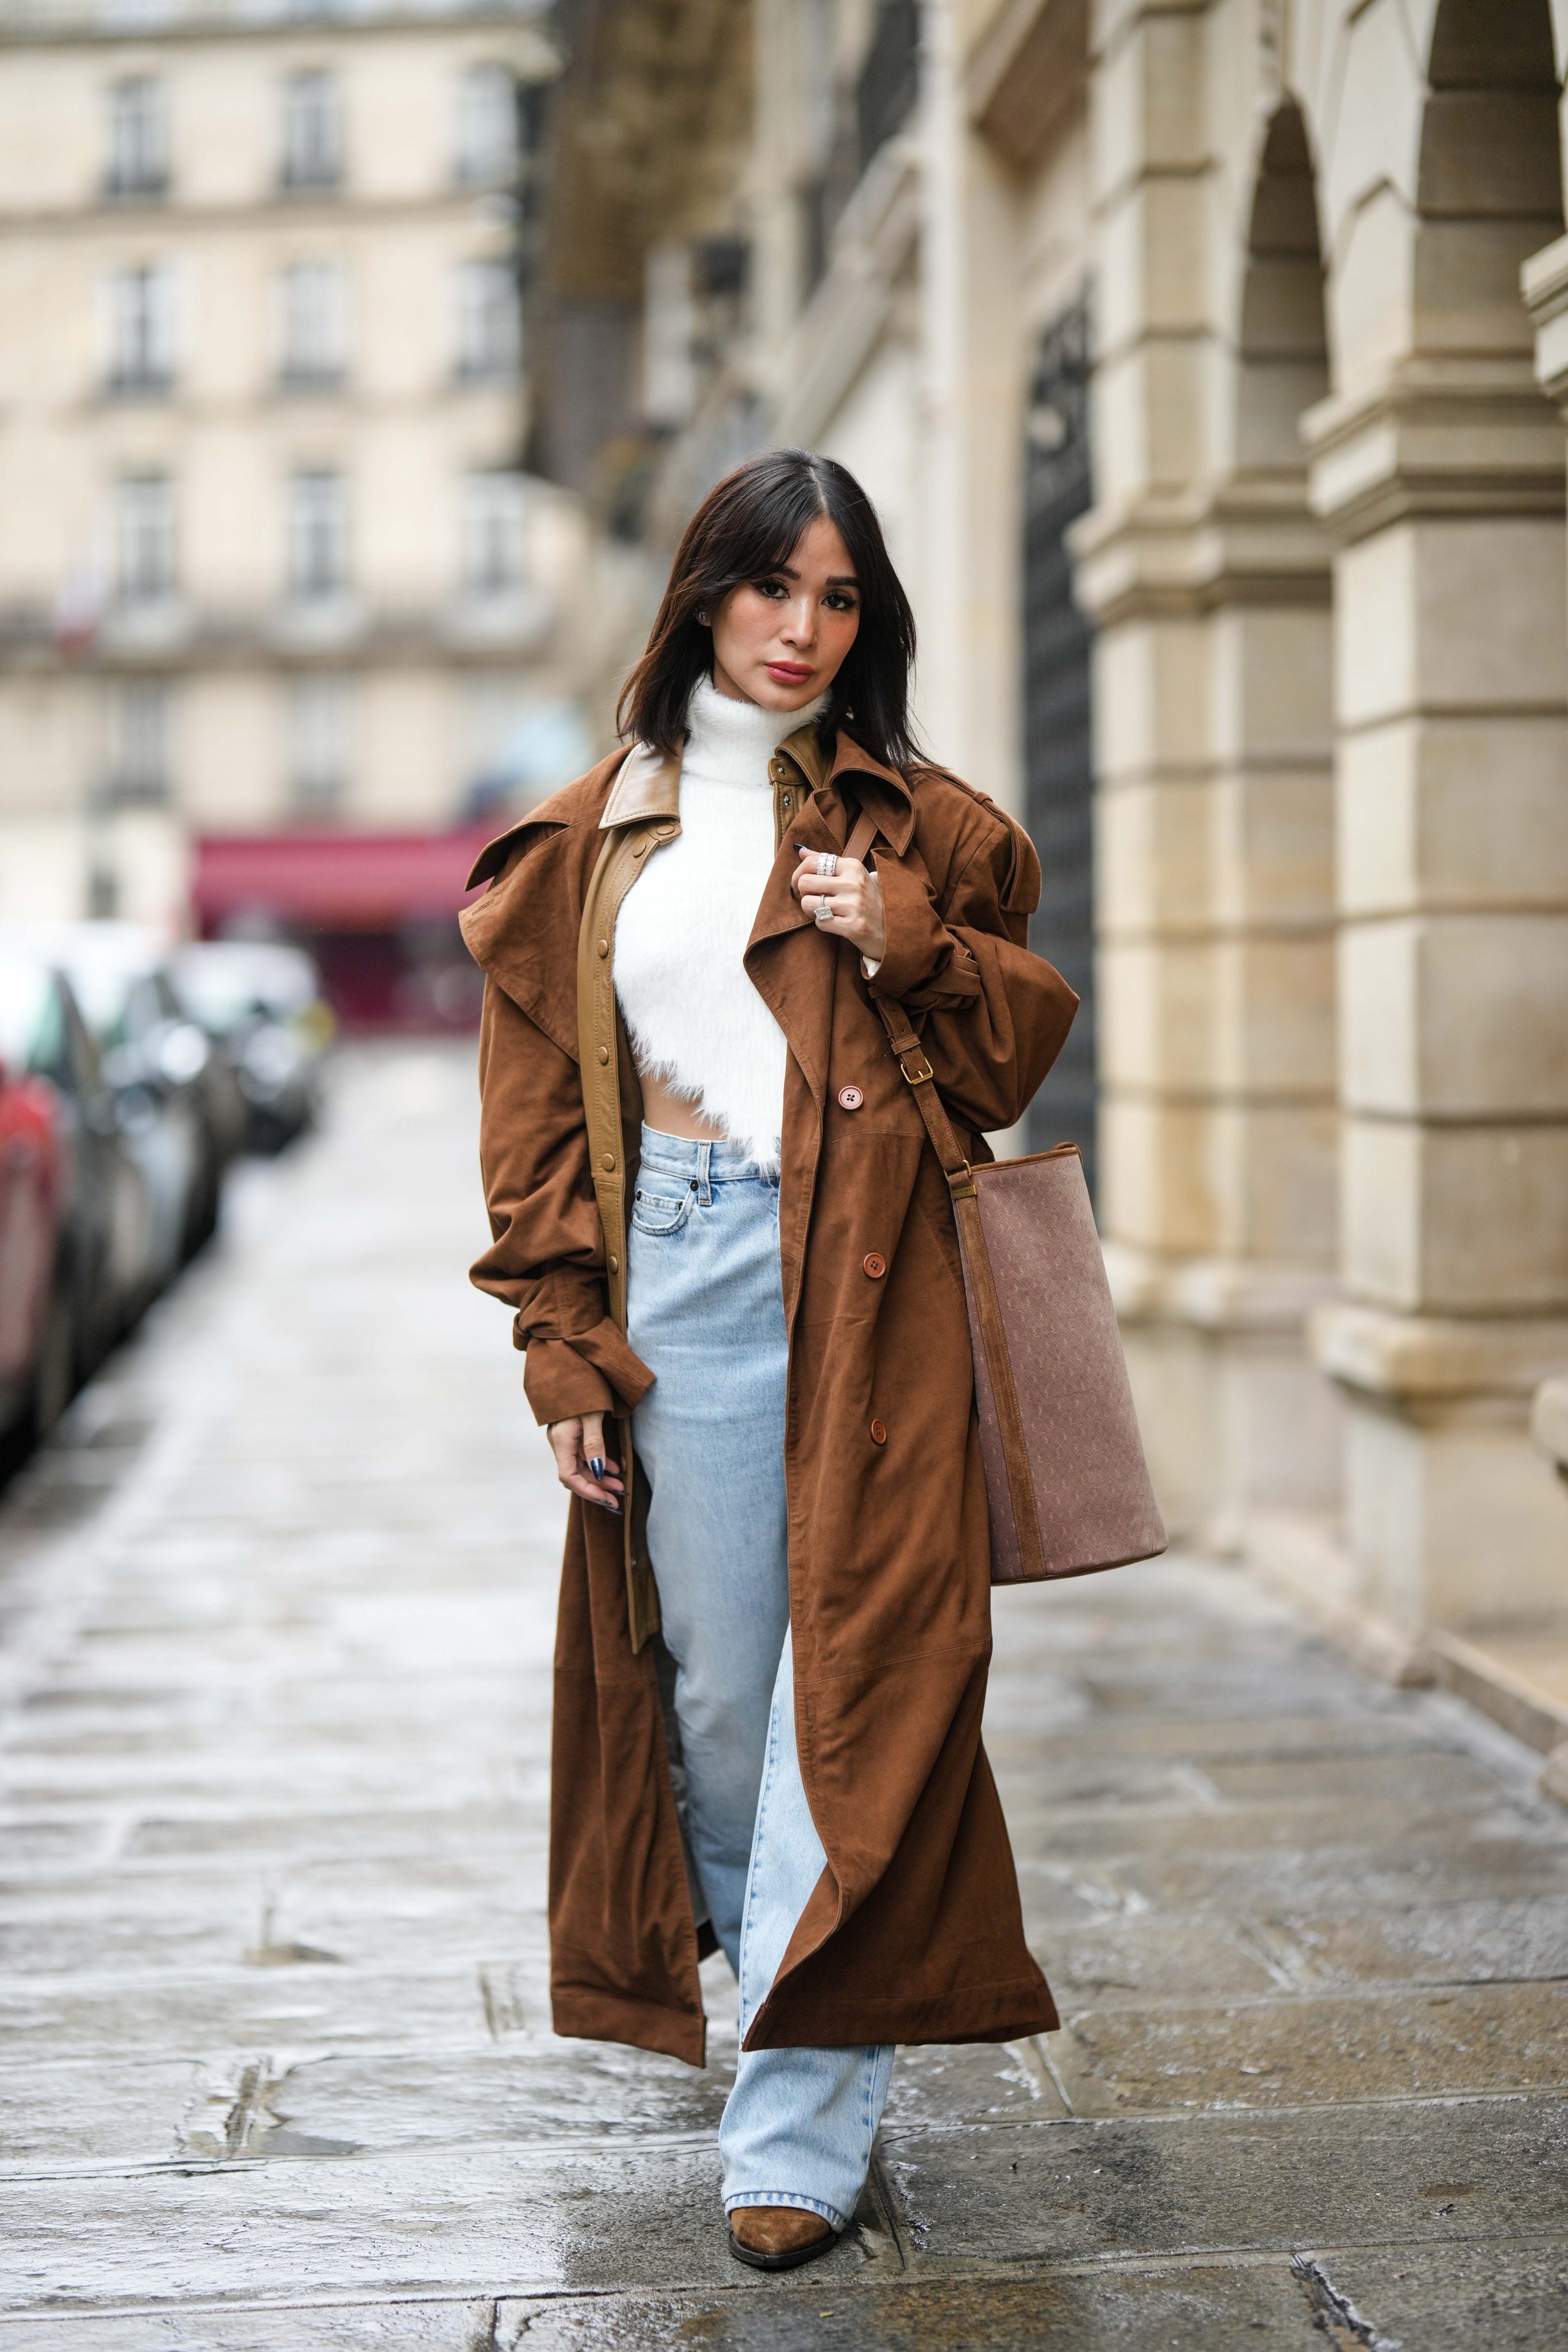 Philippines’ influencer Heart Evangelista is a fashion week regular who loves Paris, Grace Kelly, Alaïa, Bulgari Serpenti, mother of pearl and most of all, her dog Panda. Photo: Handout